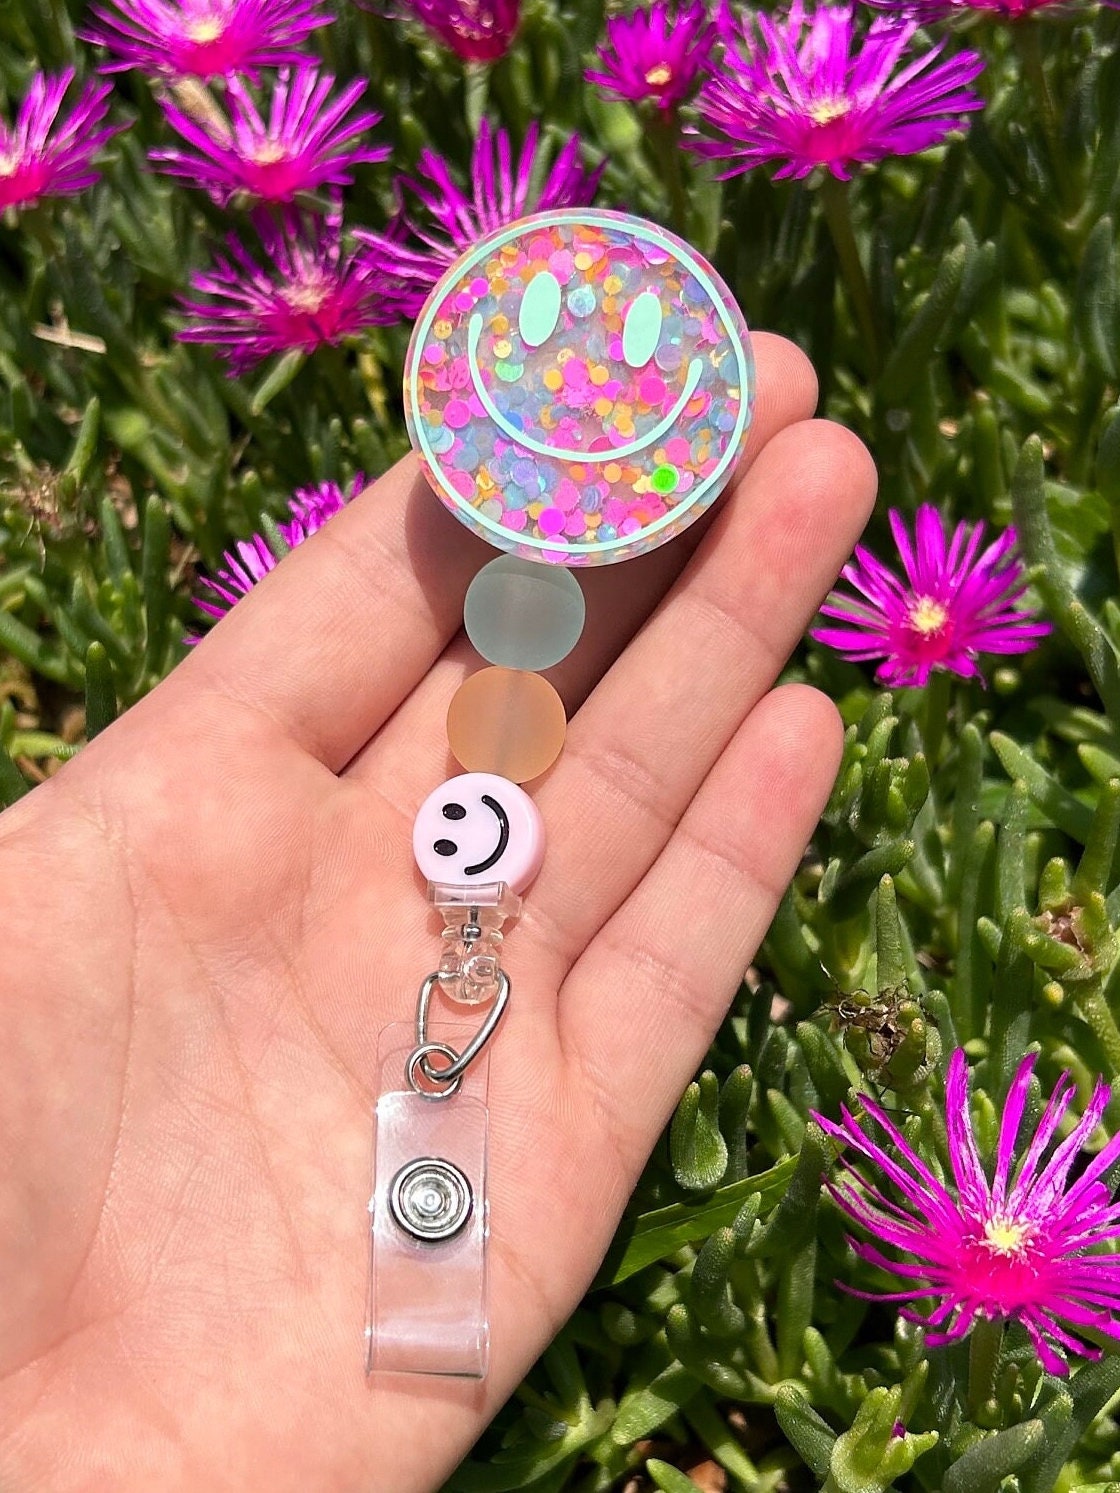 1PC Smiles Badge Reel, Cute Badge Holder Retractable with ID Clip